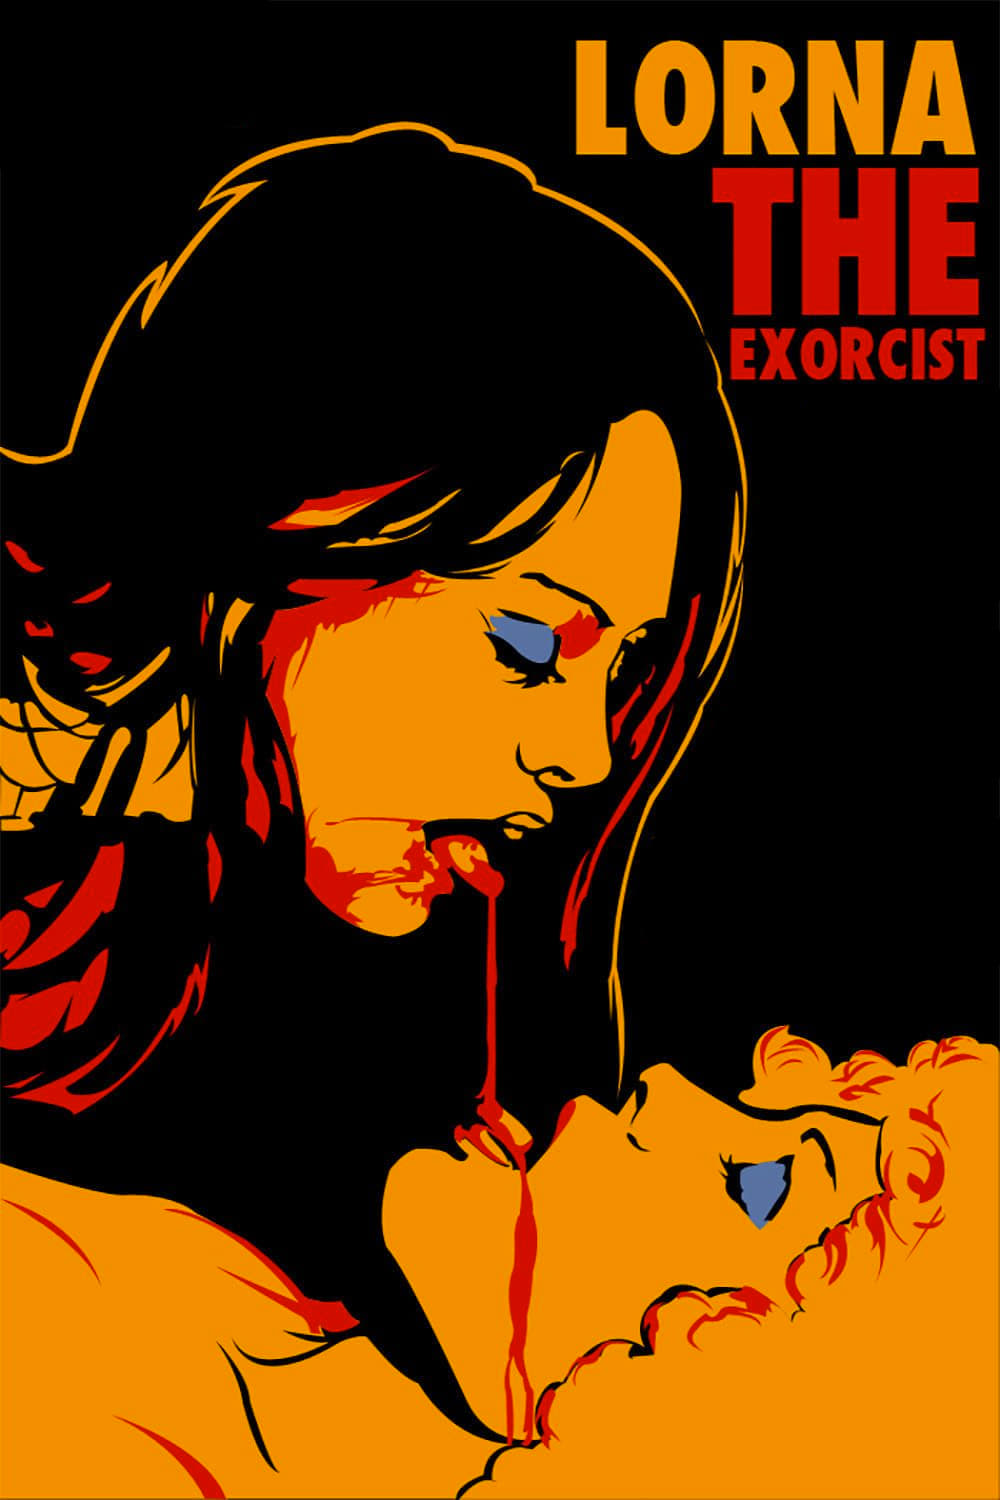 Lorna, the Exorcist (1974)